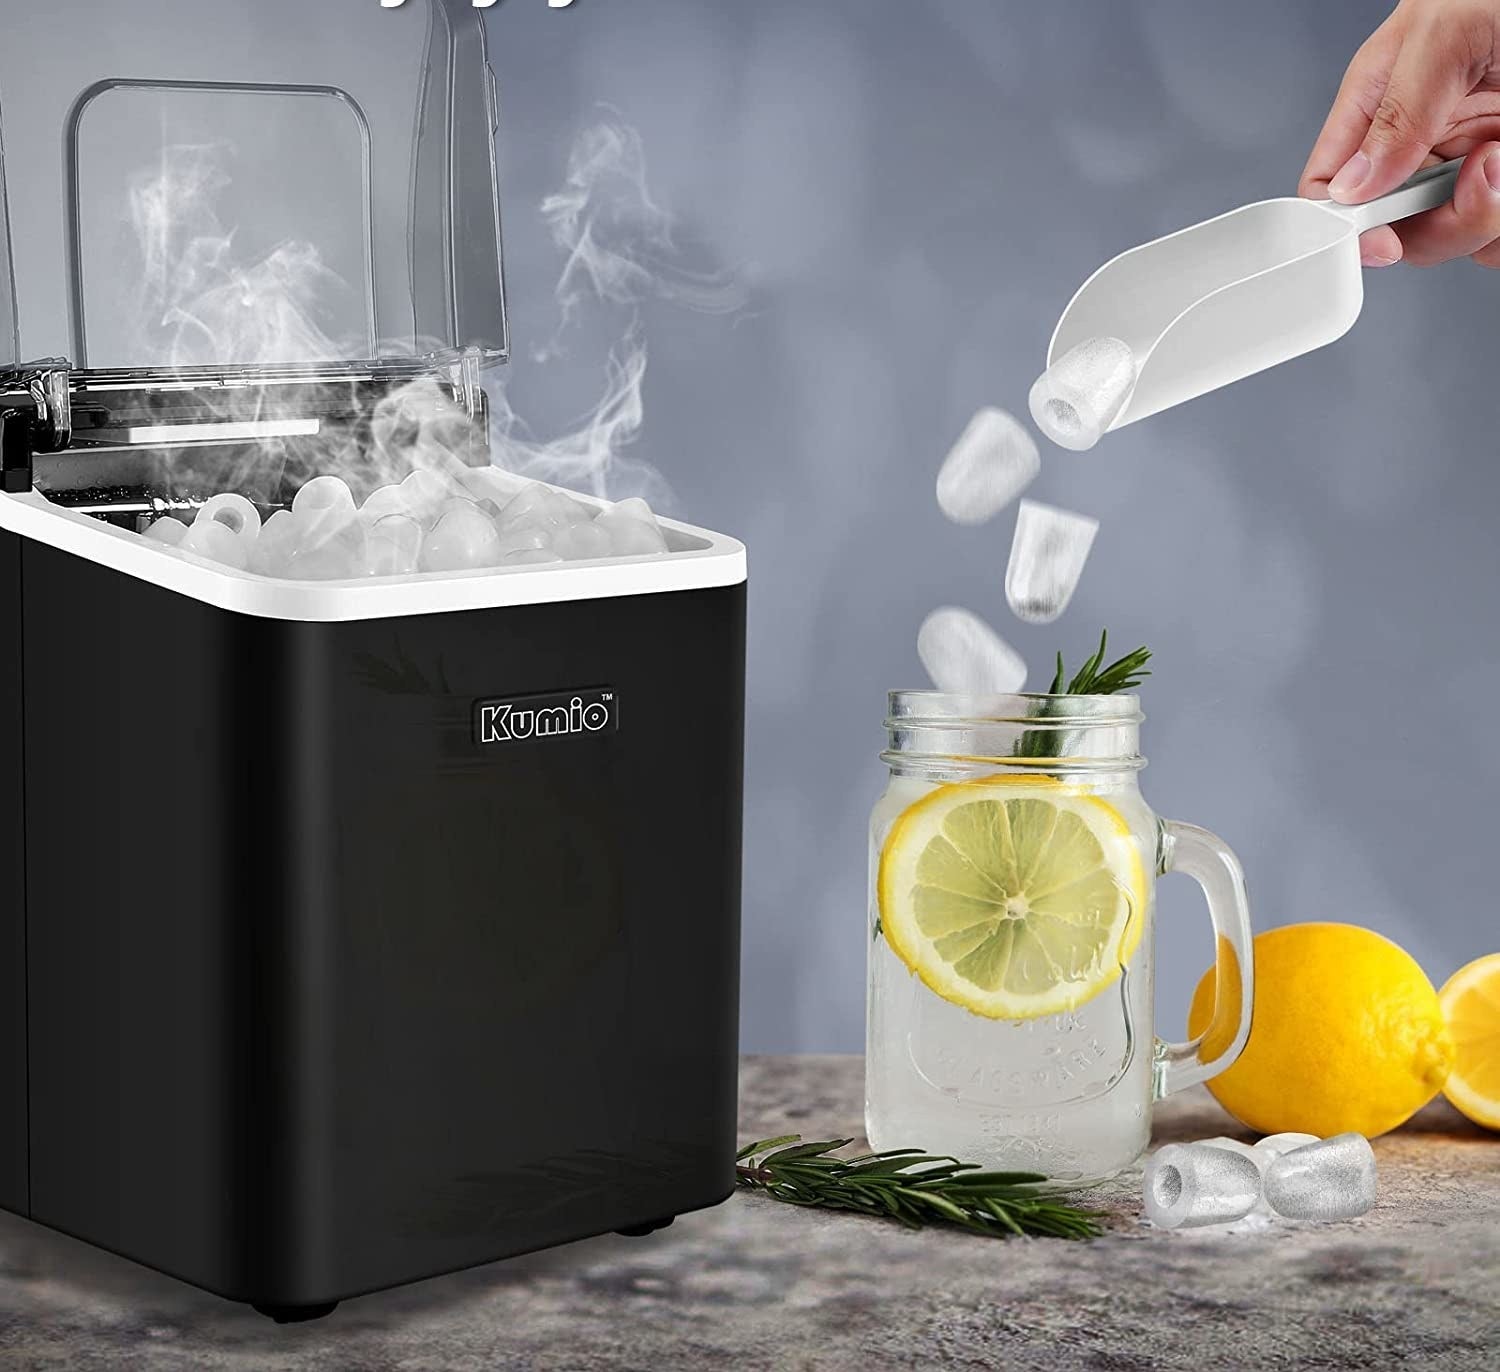 the ice machine next to a glass of lemon water that someone is pouring ice cubes into